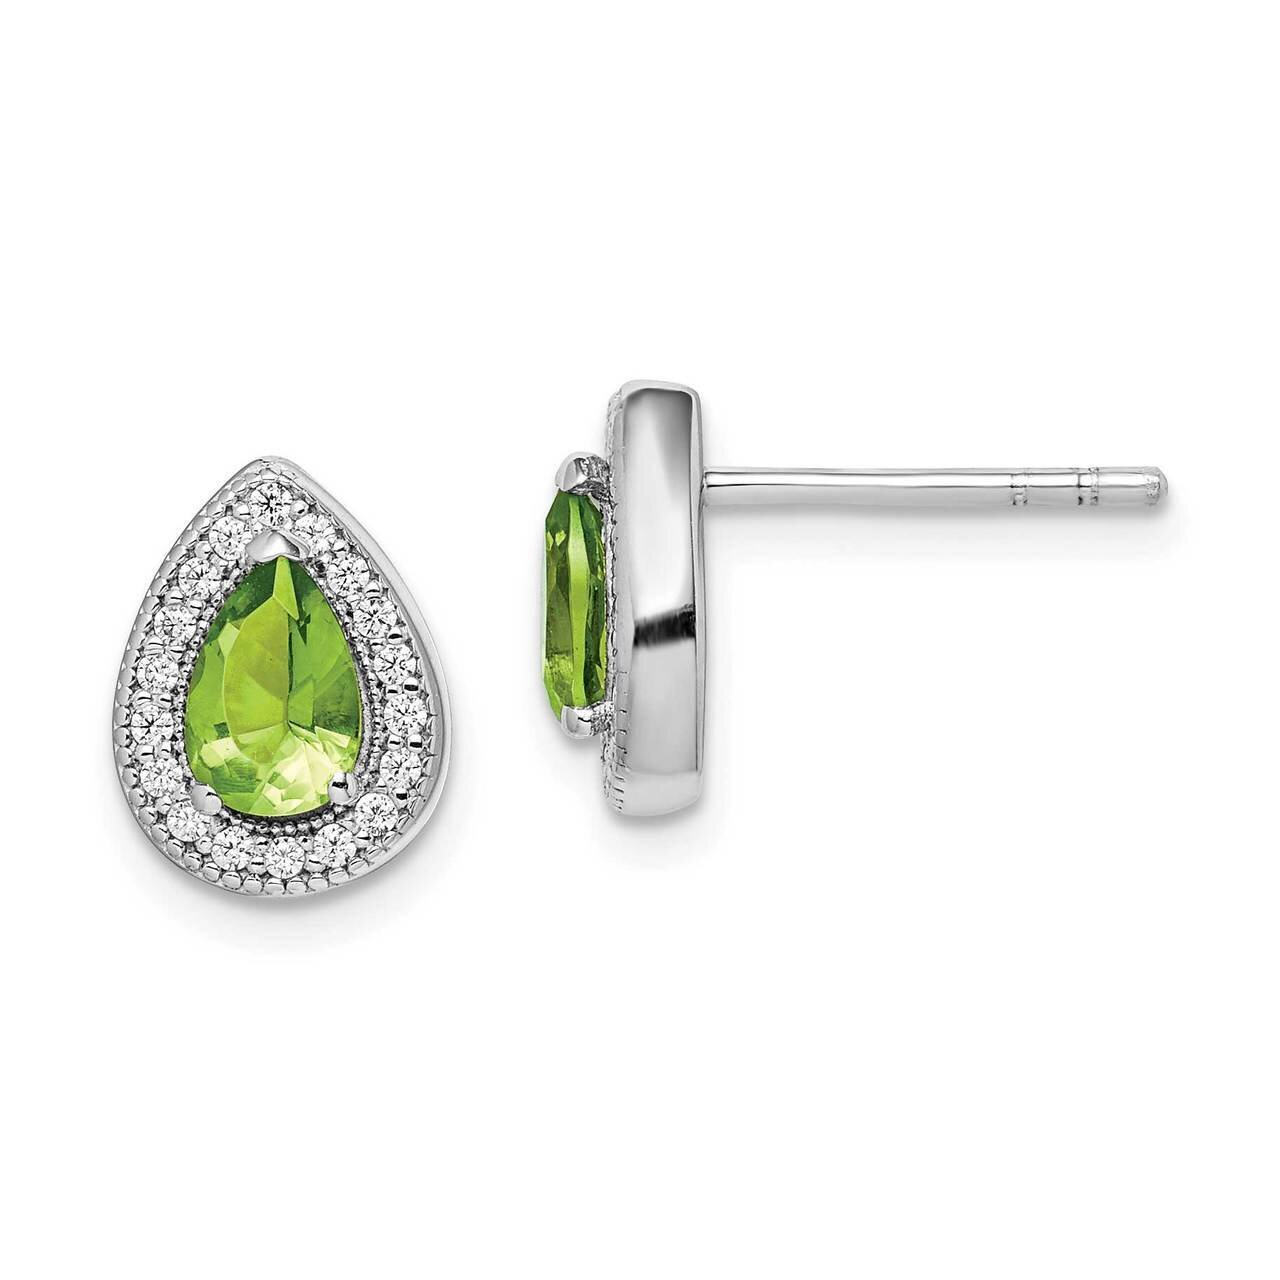 Green &amp; Clear CZ Diamond Post Earrings Sterling Silver Rhodium Plated QE14472AUG